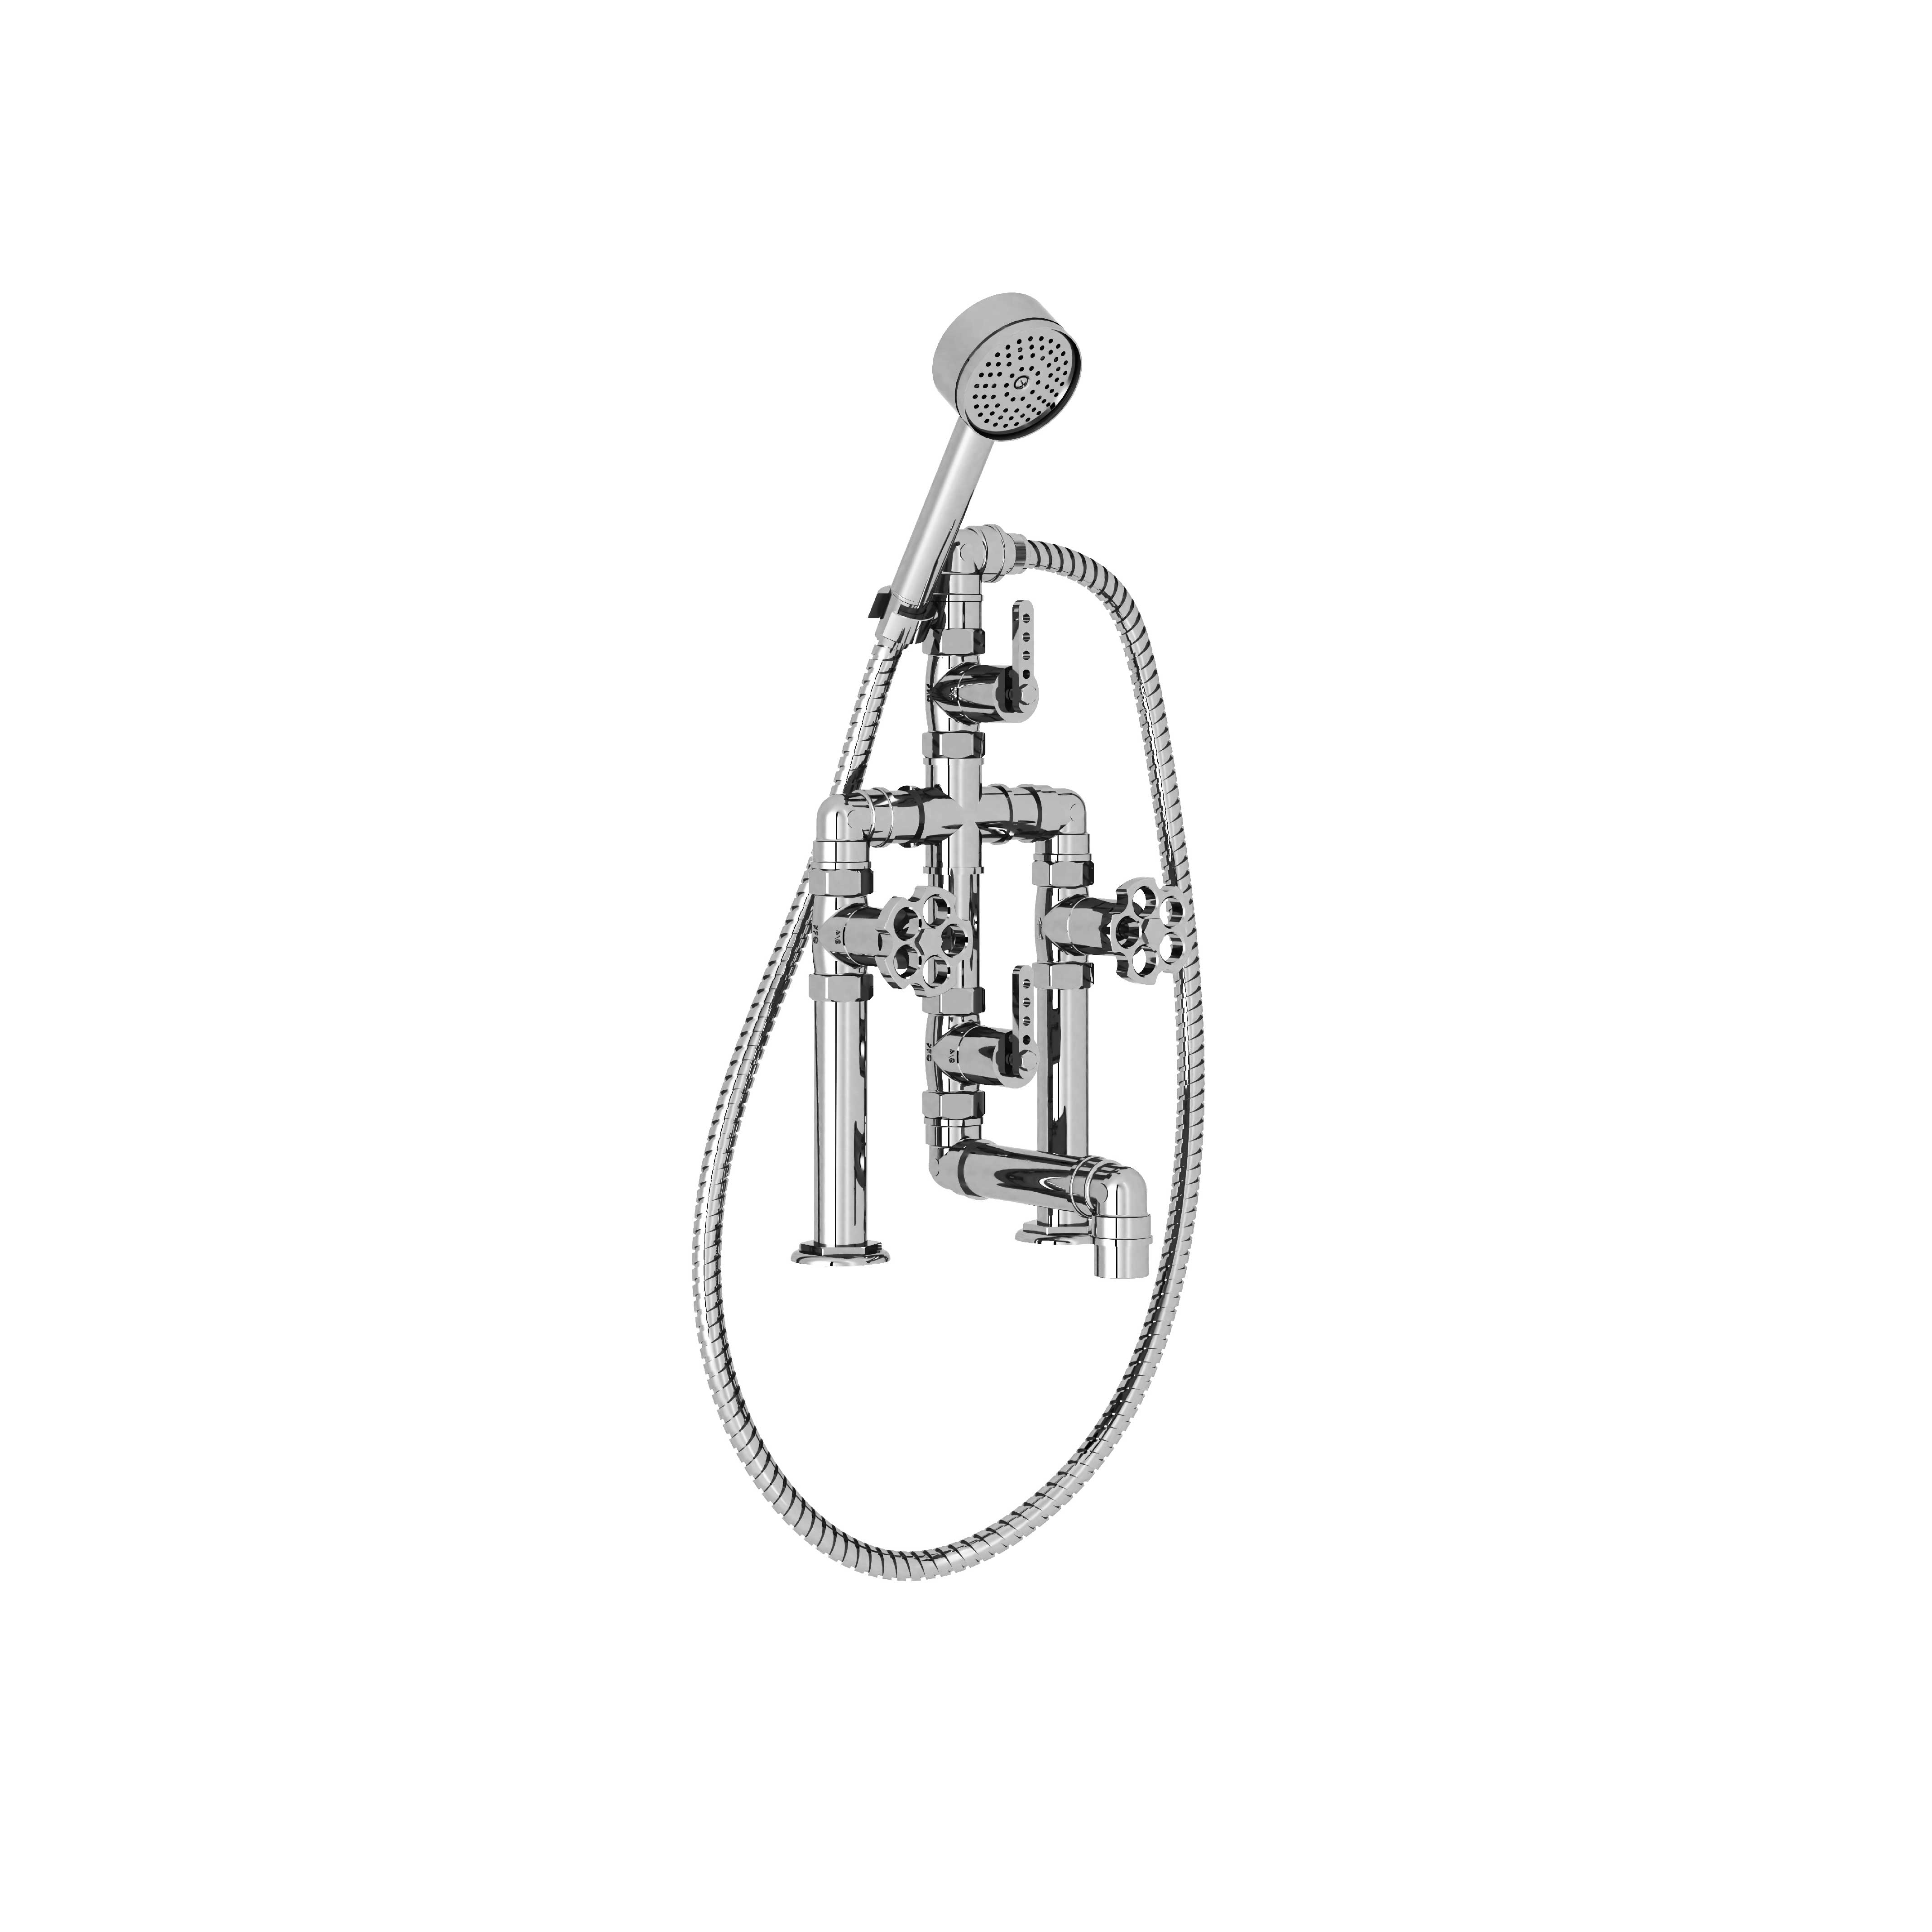 M81-3306 Rim mounted bath and shower mixer